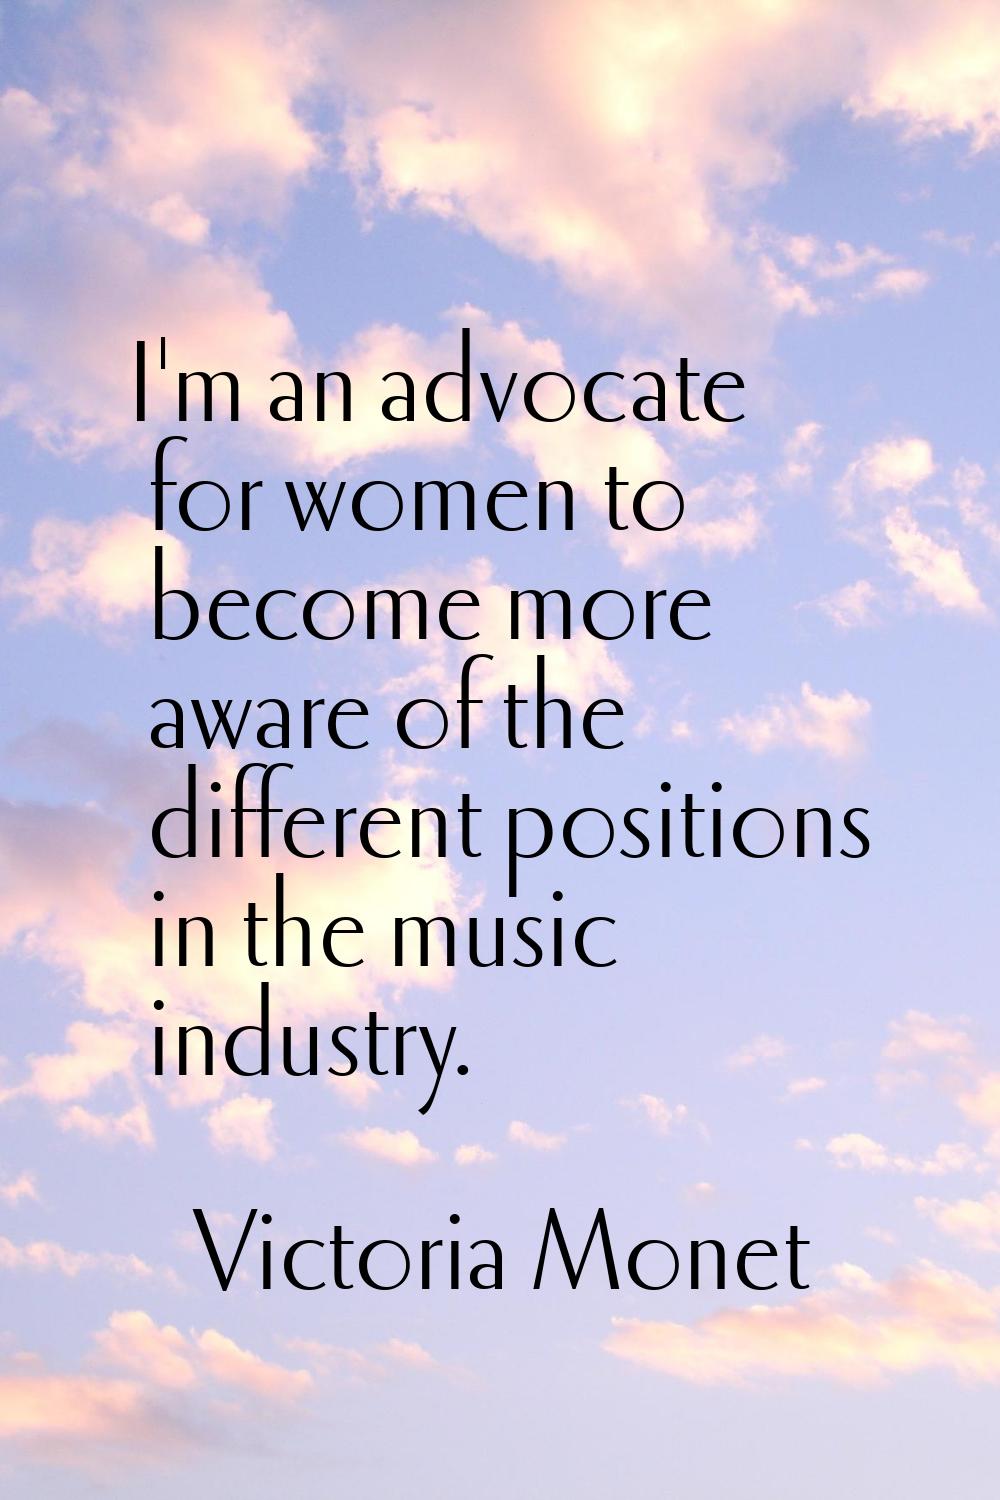 I'm an advocate for women to become more aware of the different positions in the music industry.